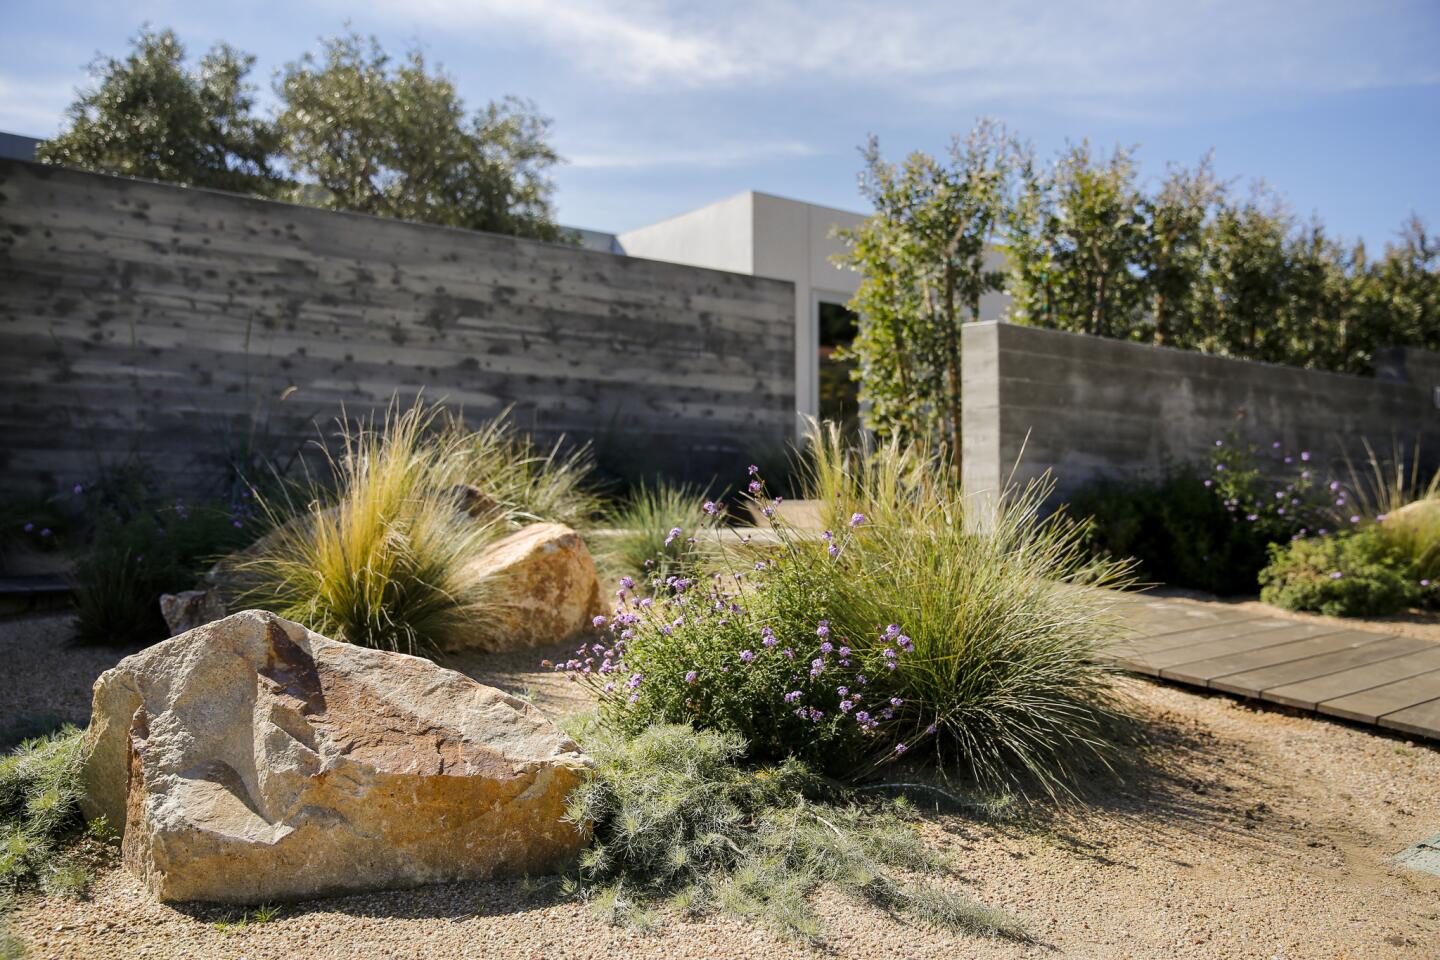 Climate-appropriate landscape design by Terremoto and board-formed concrete walls frame the entry to this home in Pacific Palisades, with a remodel done by architect Takashi Yanai with Ehrlich Yanai Rhee Chaney Architects.